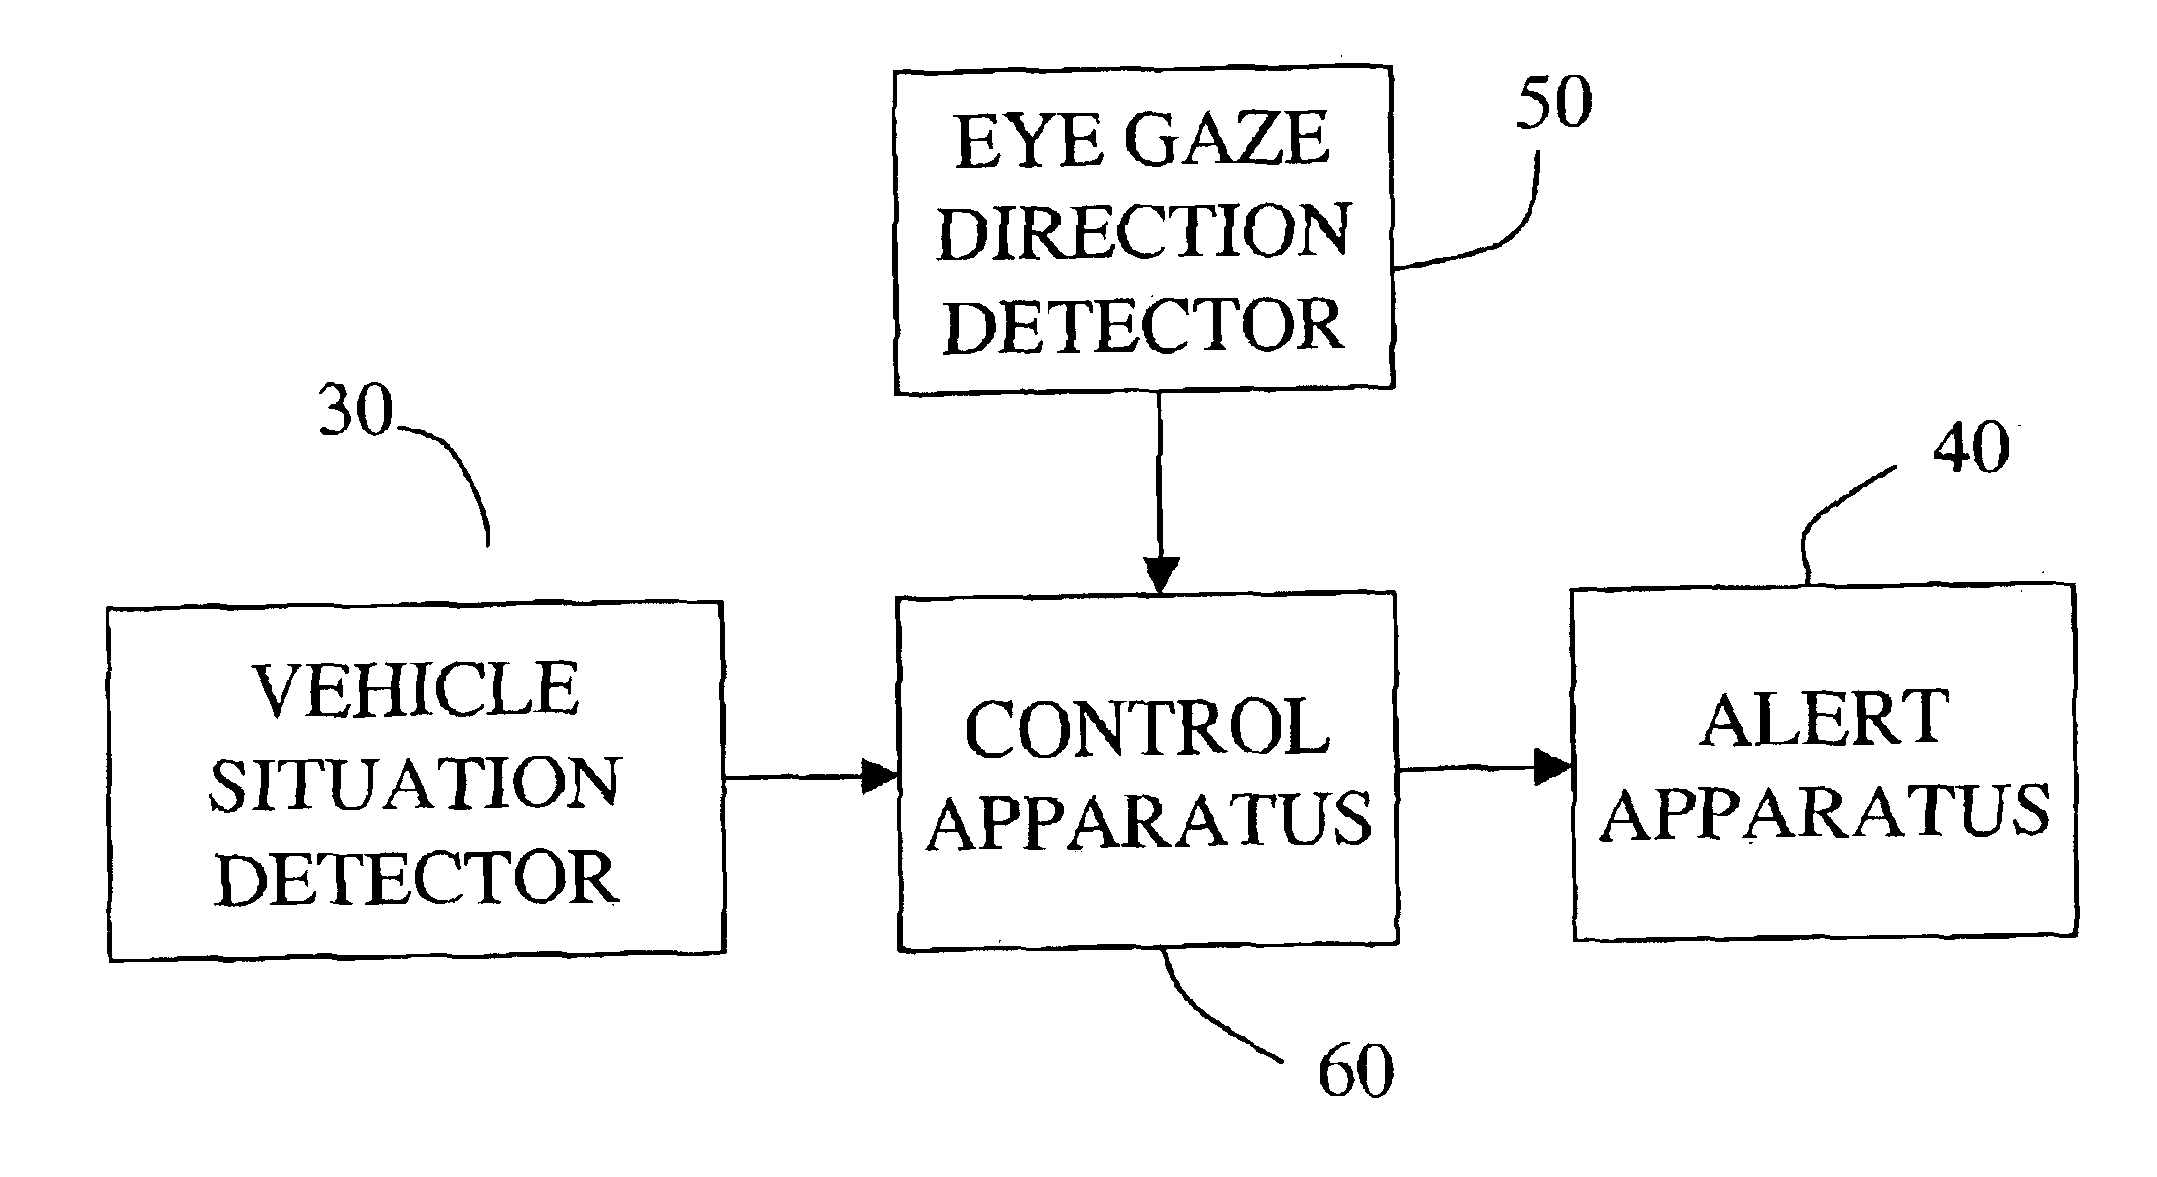 Vehicle situation alert system with eye gaze controlled alert signal generation